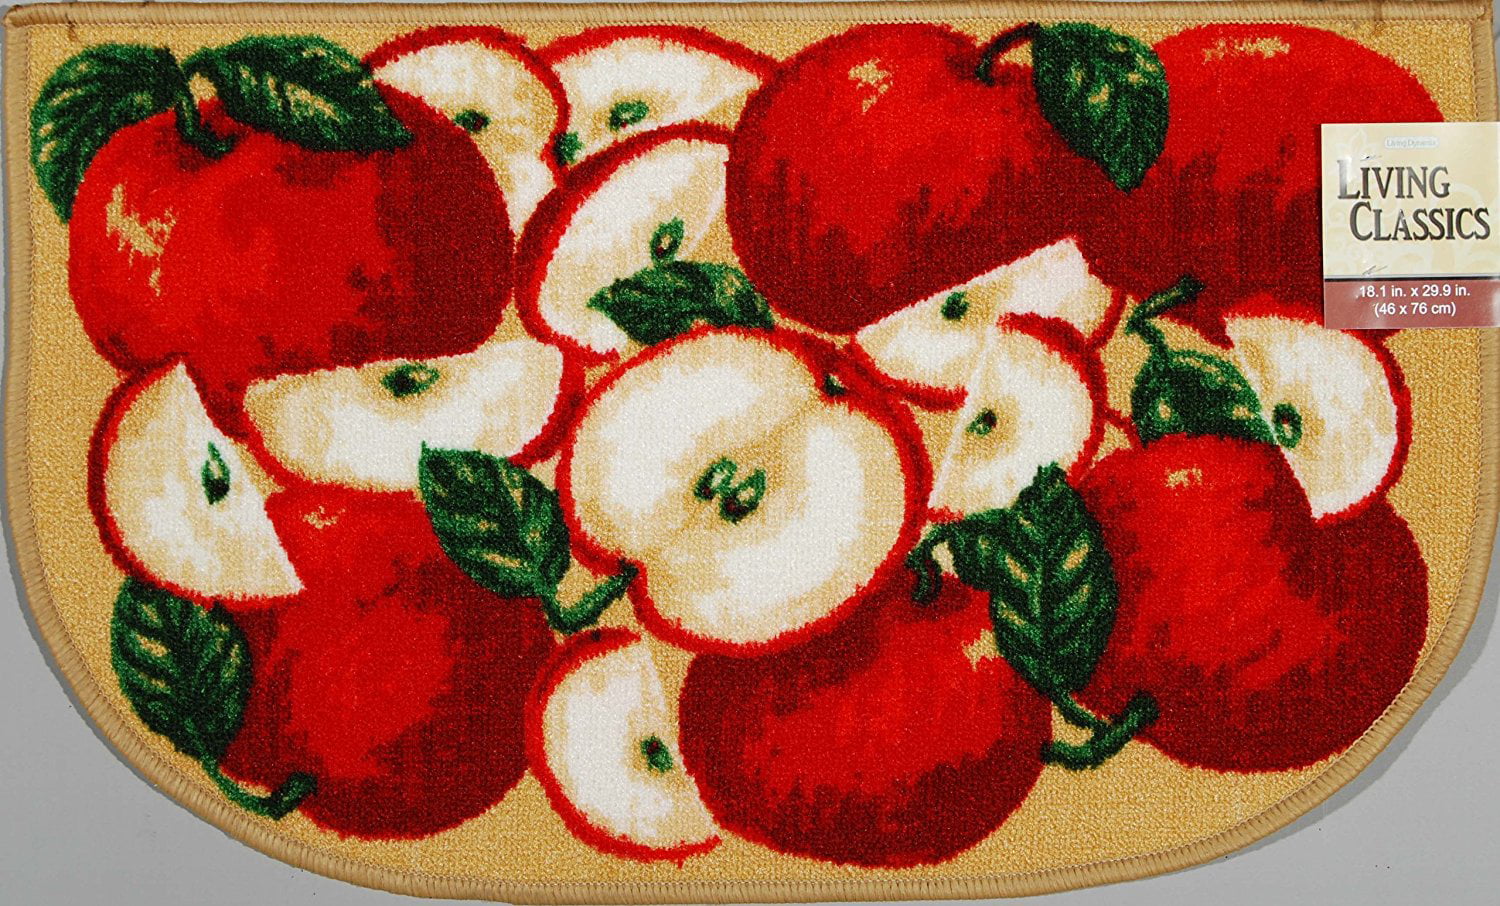 3 & HALF RED APPLES AH 17"x28" nonskid back KITCHEN ACCENT RUG 